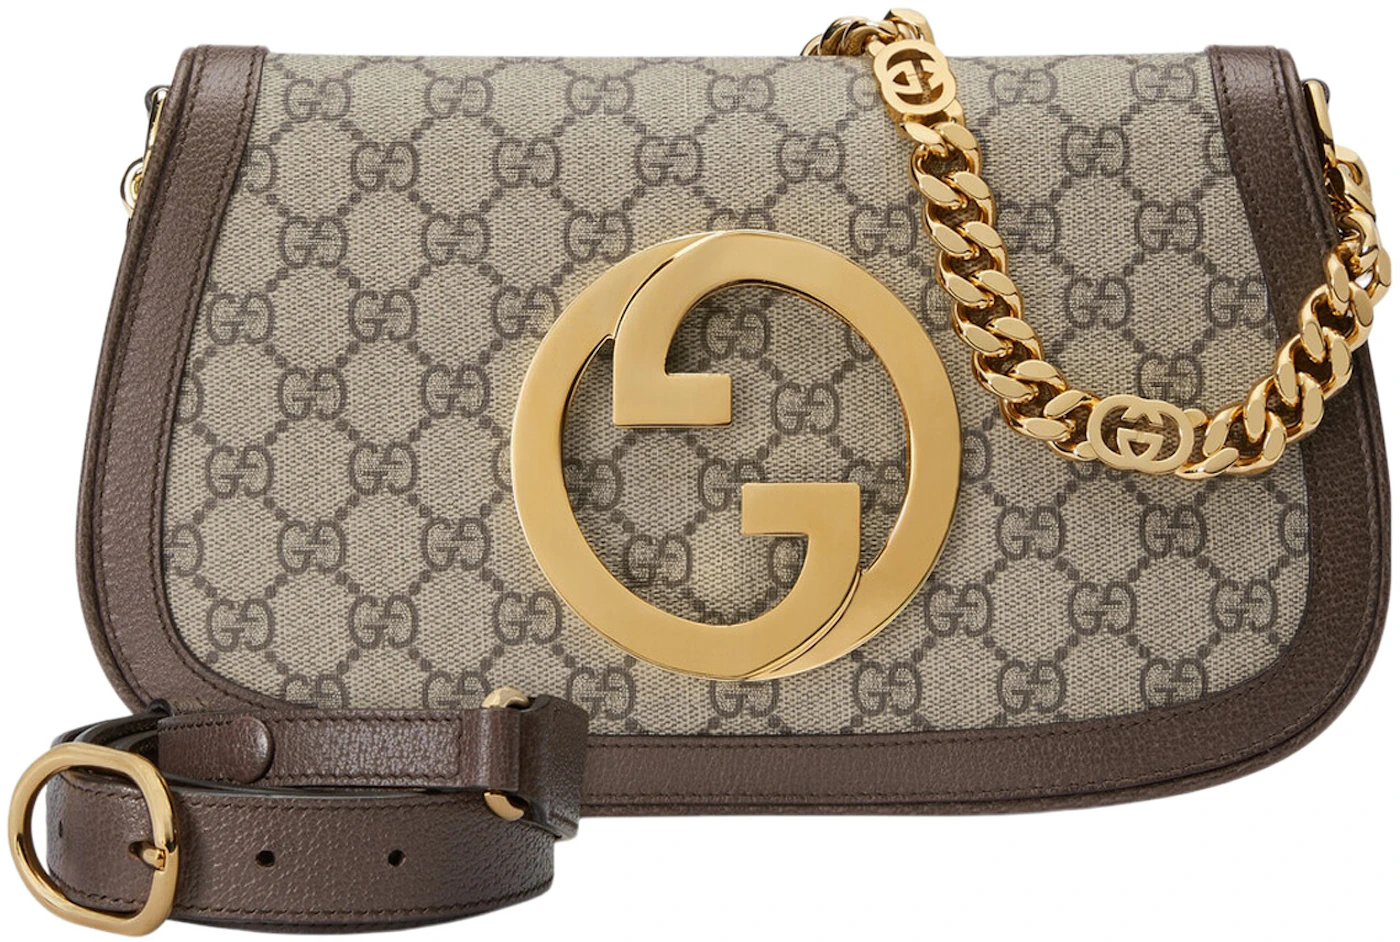 Gucci Blondie Small Leather Shoulder Bag in Pink - Gucci